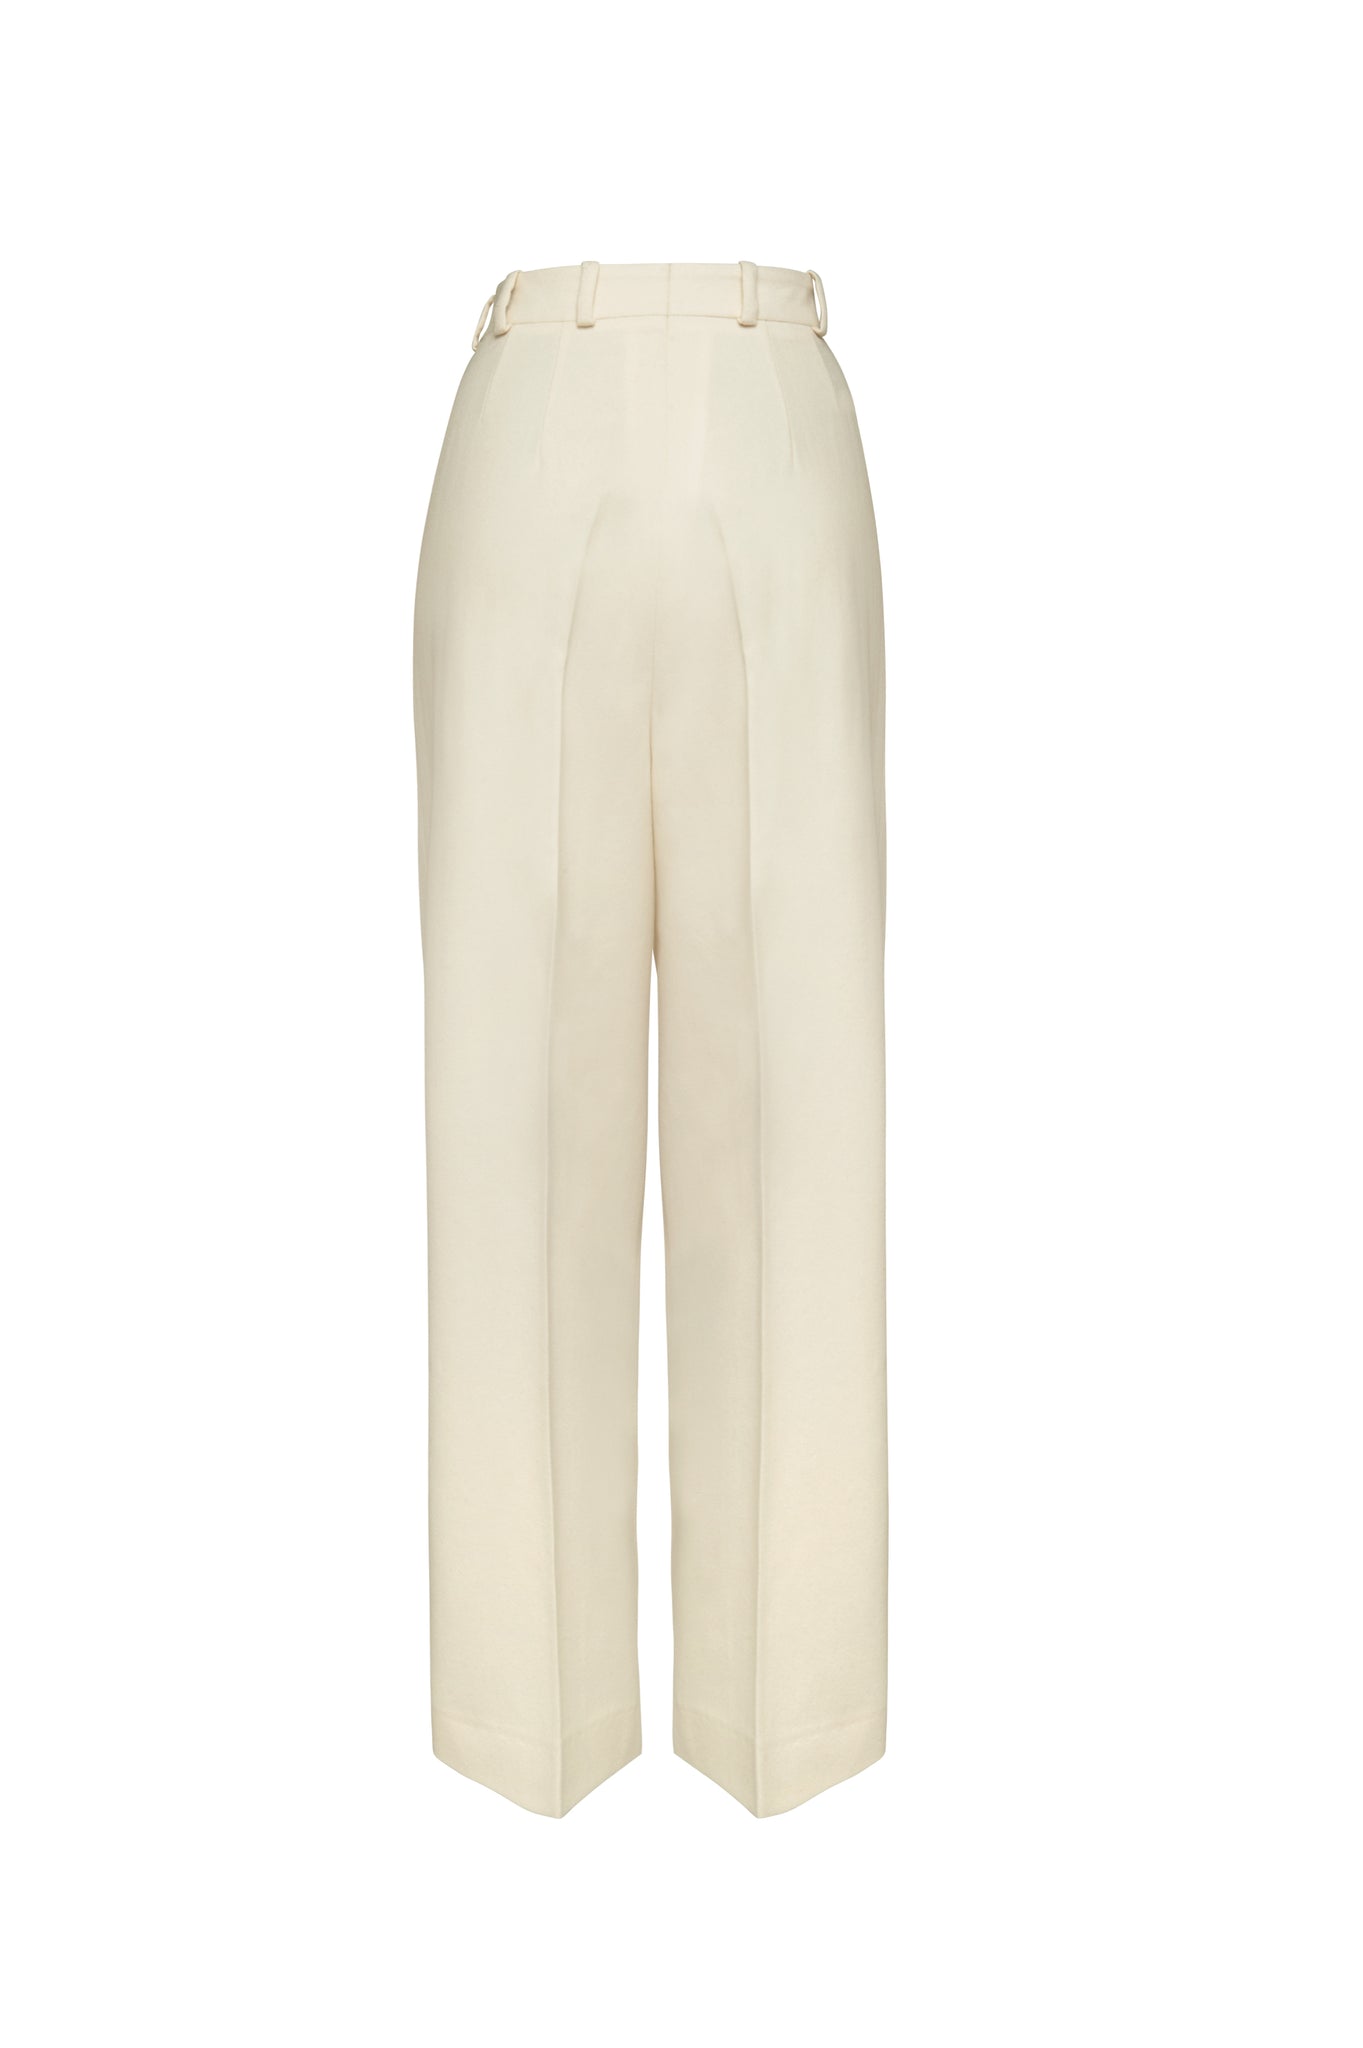 01/2 High Waisted Pants ivory back - hello'ben store